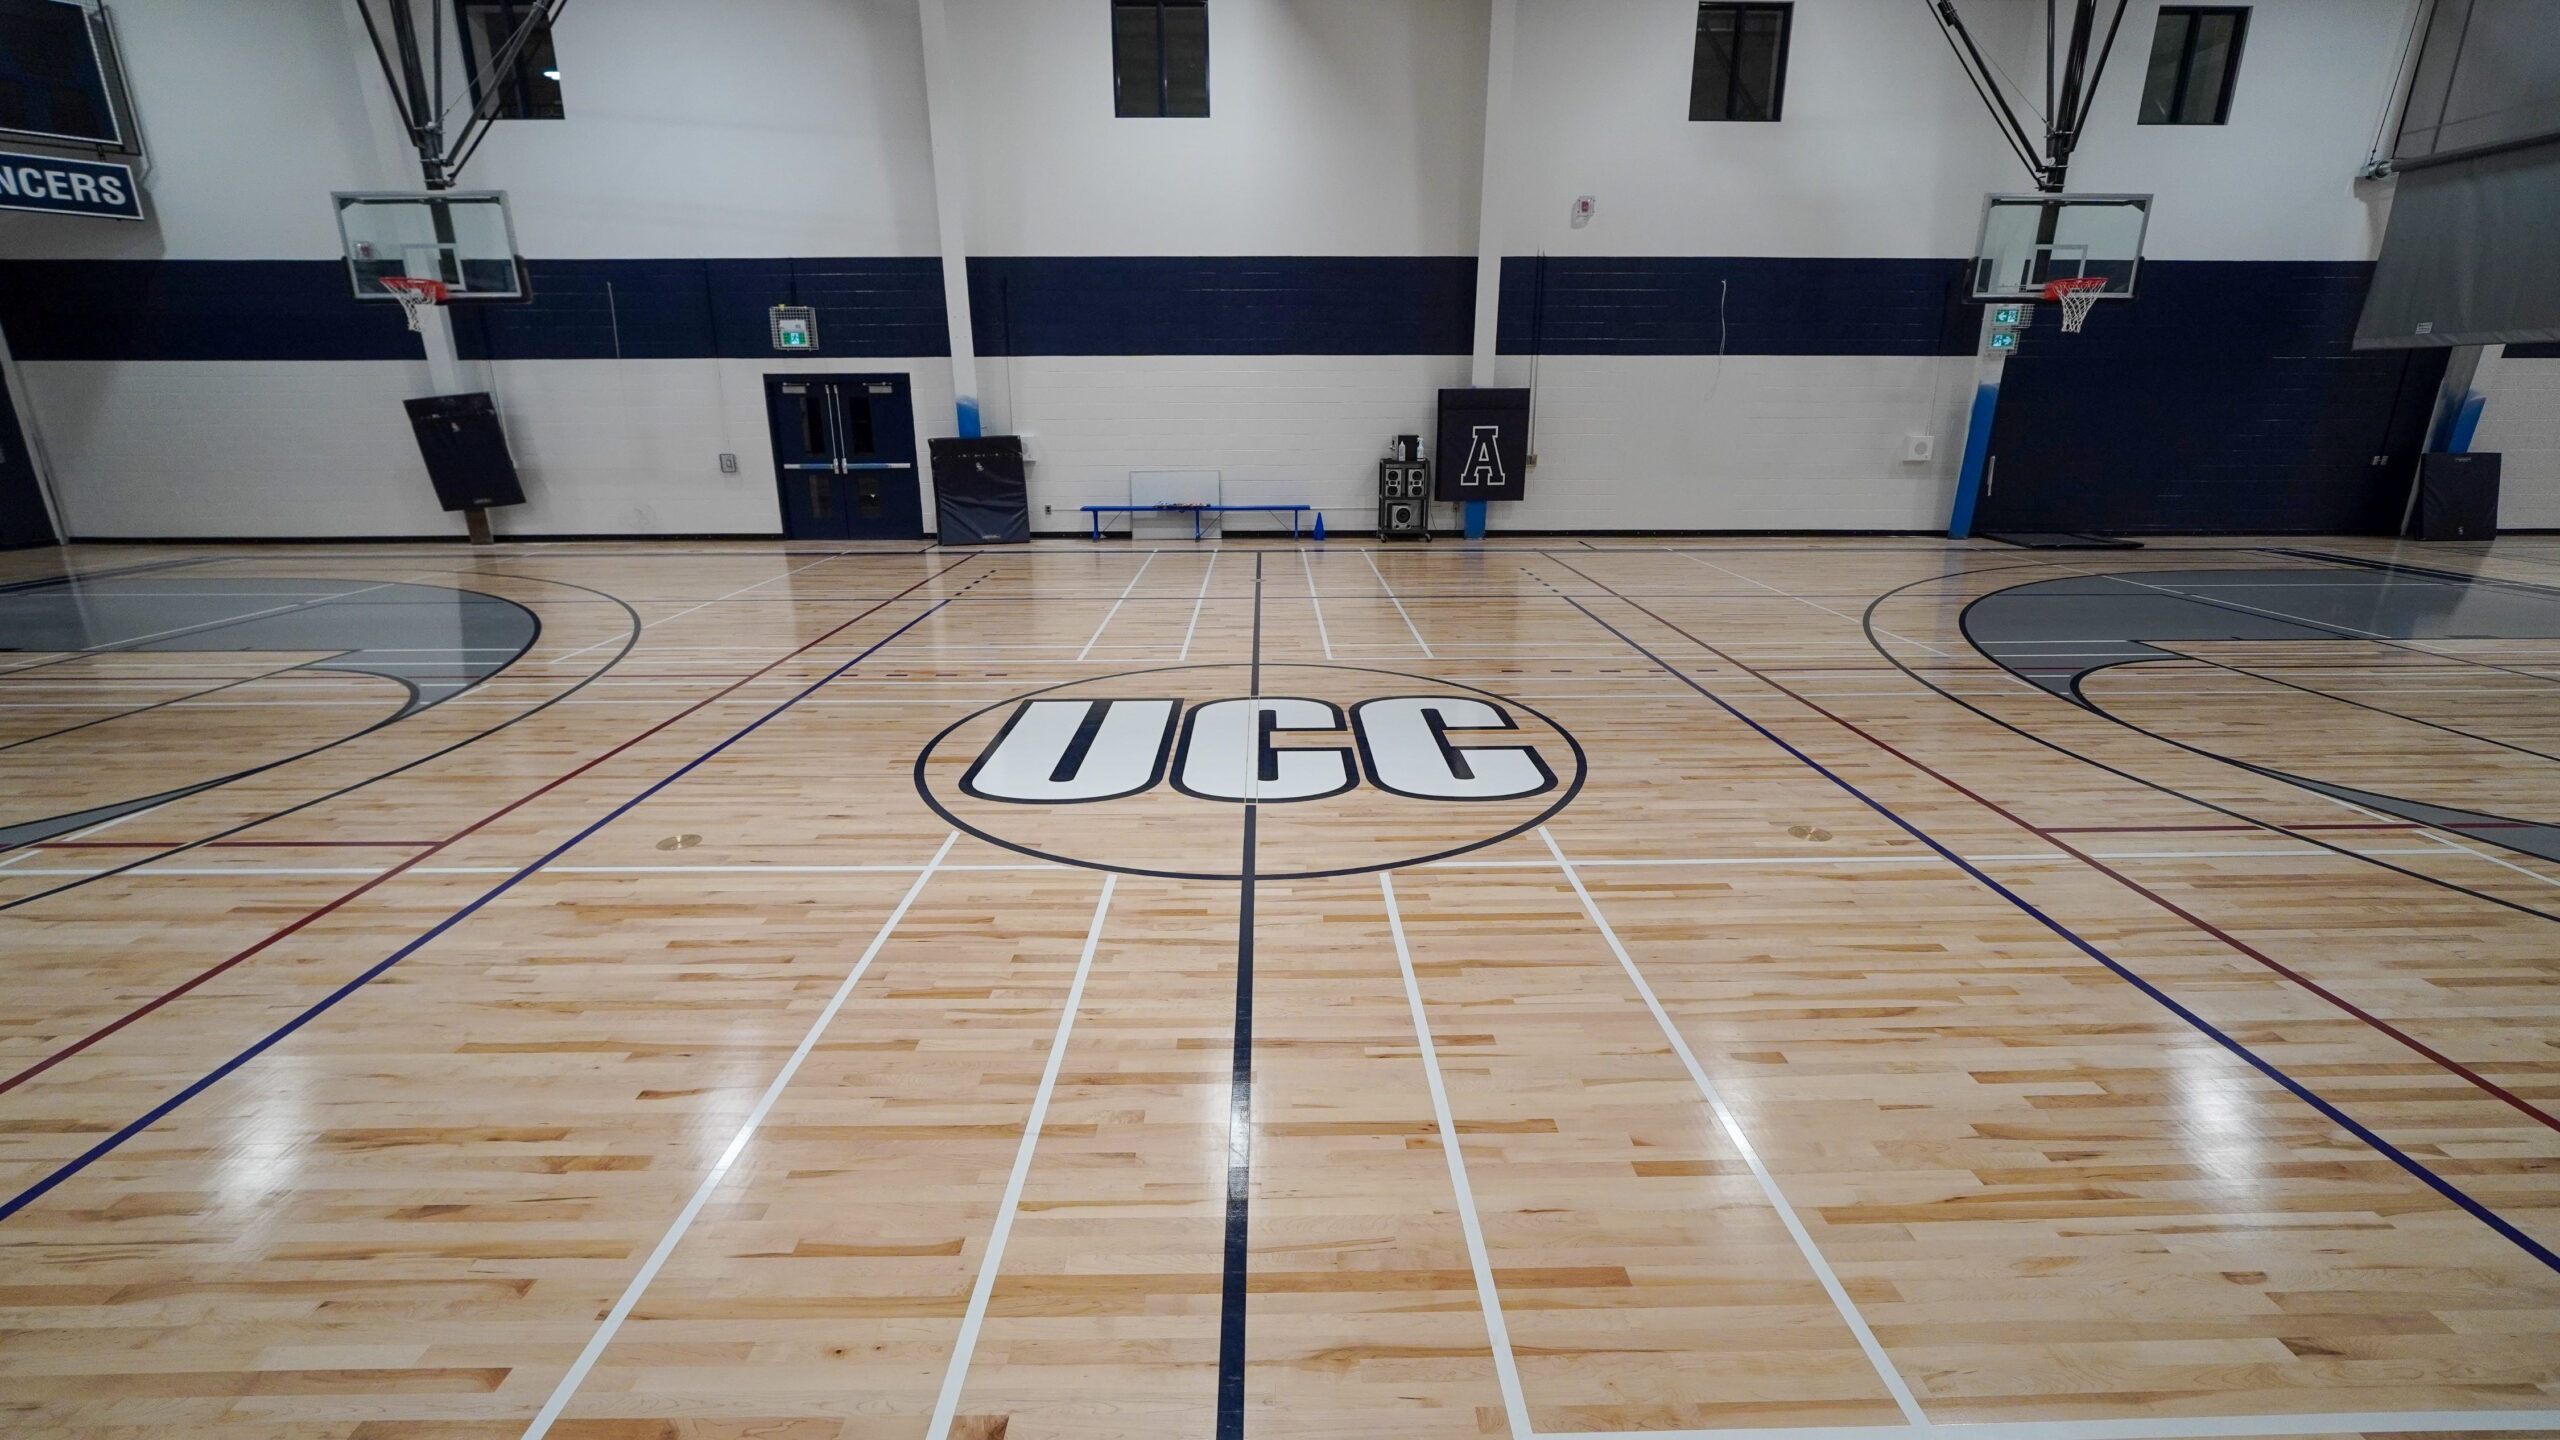 Pep Rally and Blessing Held in New UCC Gym